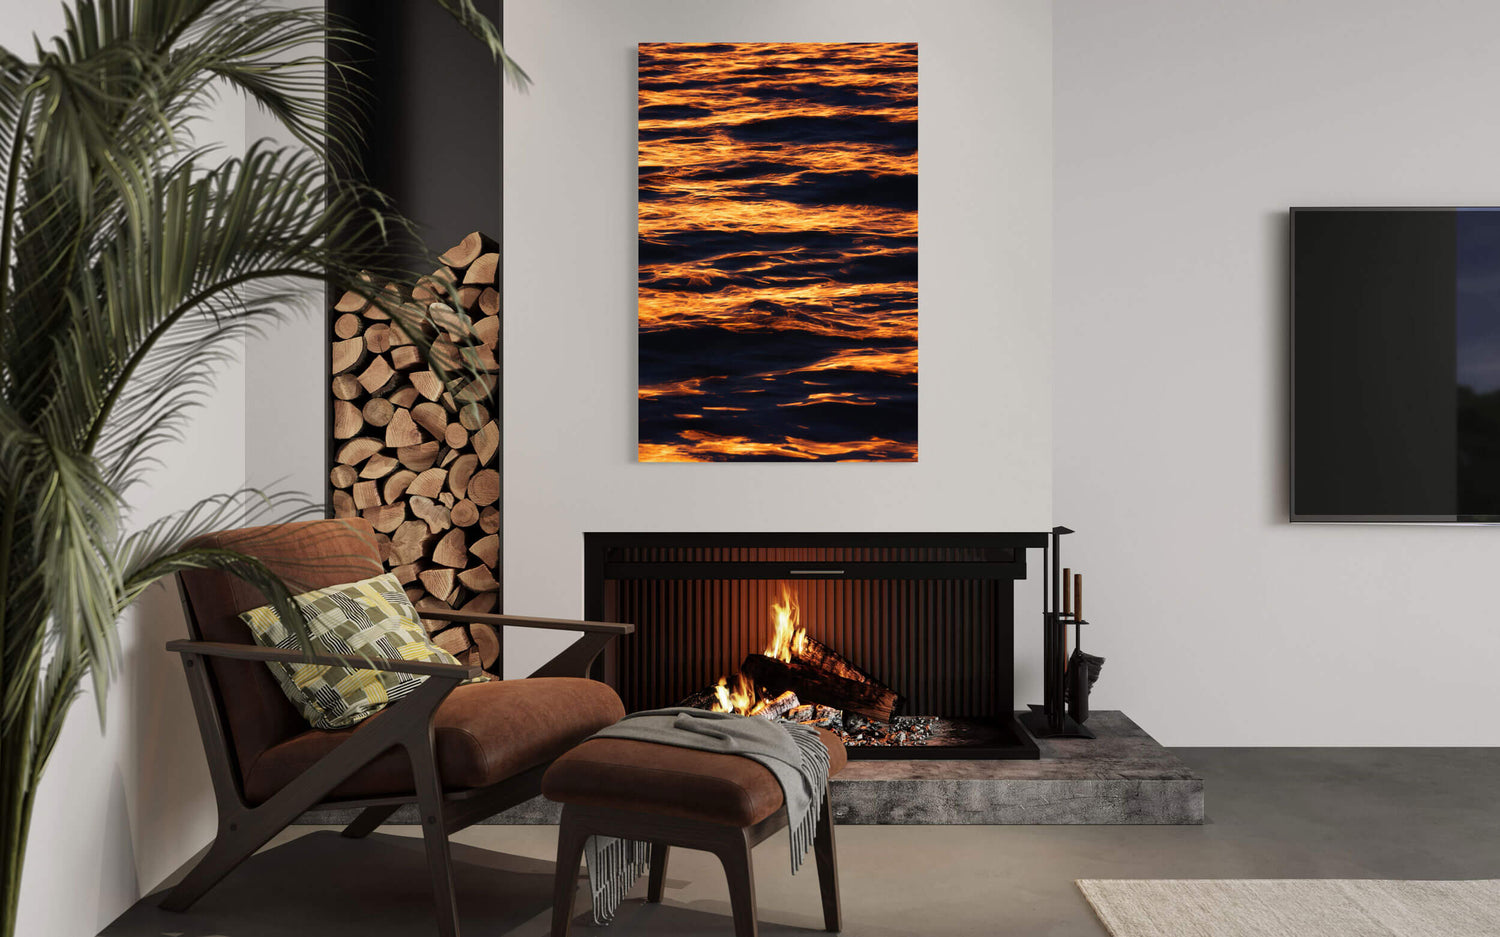 An Alki Beach picture of the Puget Sound from West Seattle hangs in a living room.